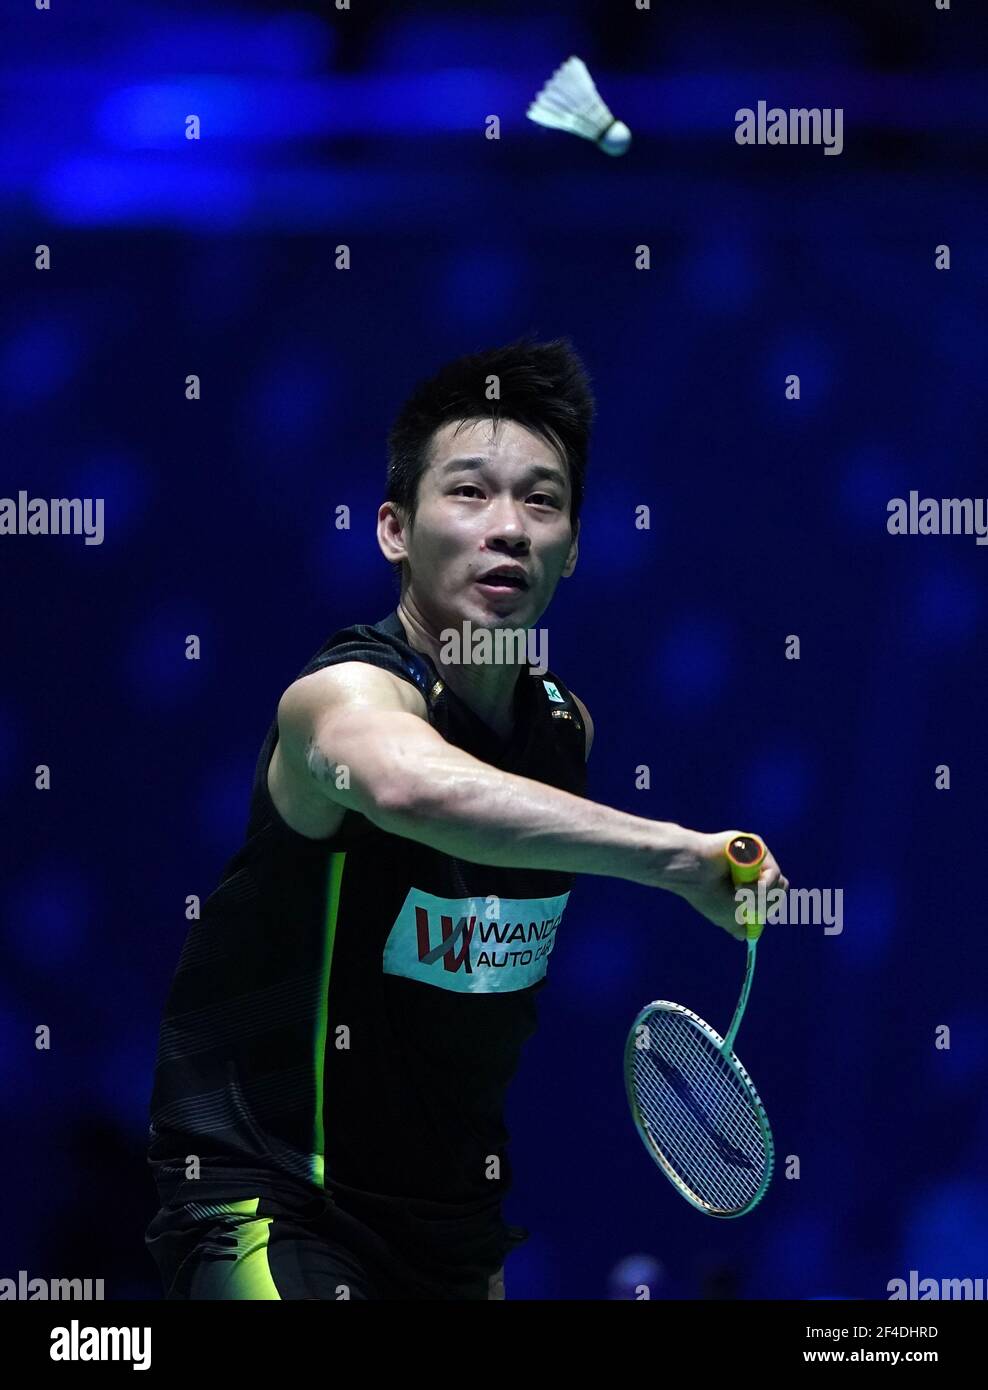 Malaysia's Chan Peng Soon in action during his match against Japan's Yuki Kaneko and Misaki Matsutomo on day four of the YONEX All England Open Badminton Championships at Utilita Arena Birmingham. Picture date: Friday March 19, 2021. Stock Photo